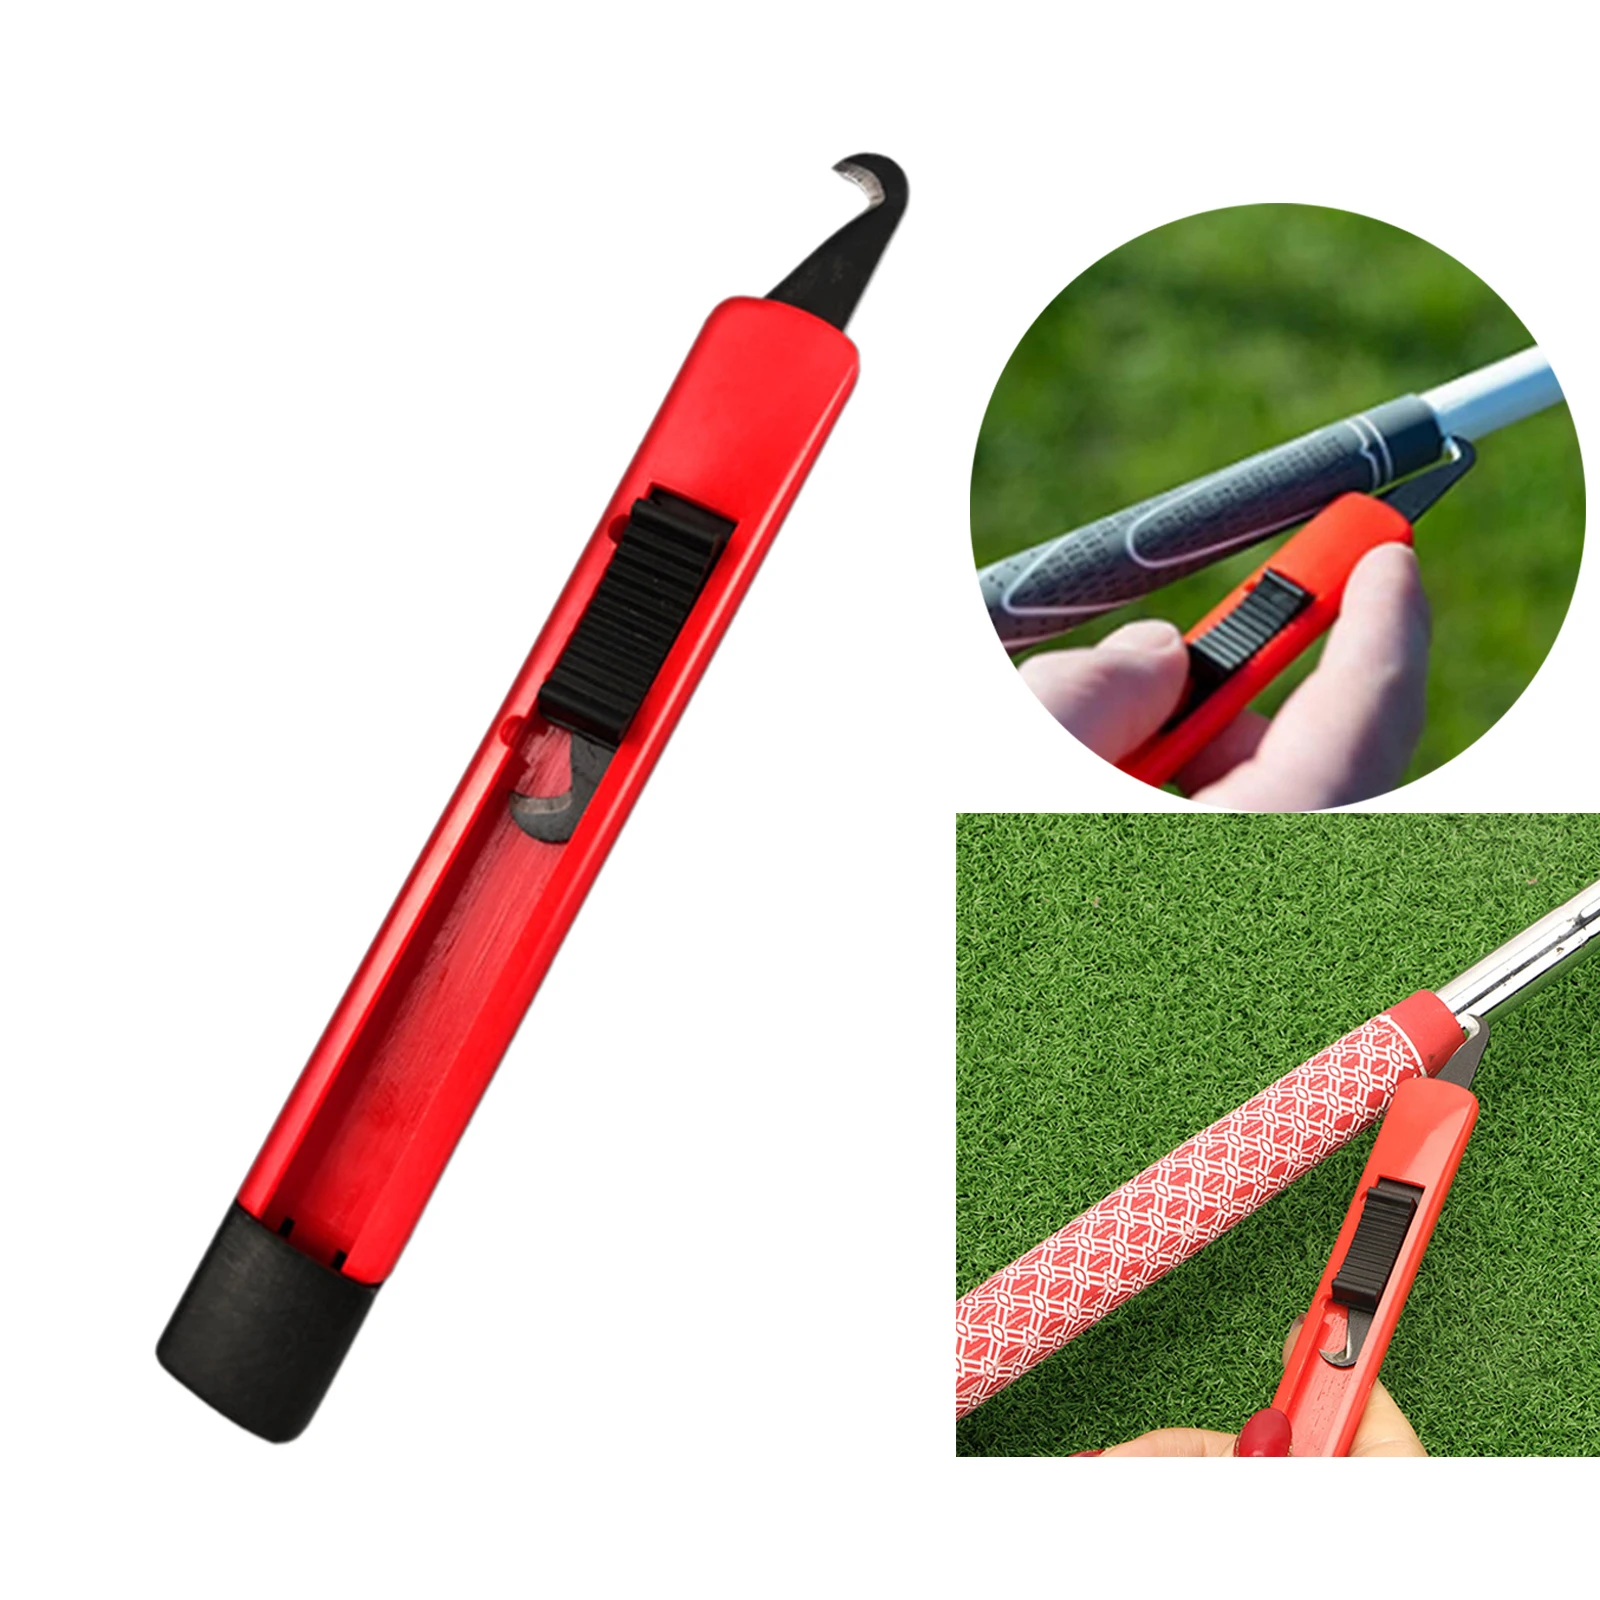 Golf Club Grip Change Regrip Remover Tool Accessory Carbon Steel Plastic Grip,Golf Grip Kits for Regripping Golf Clubs